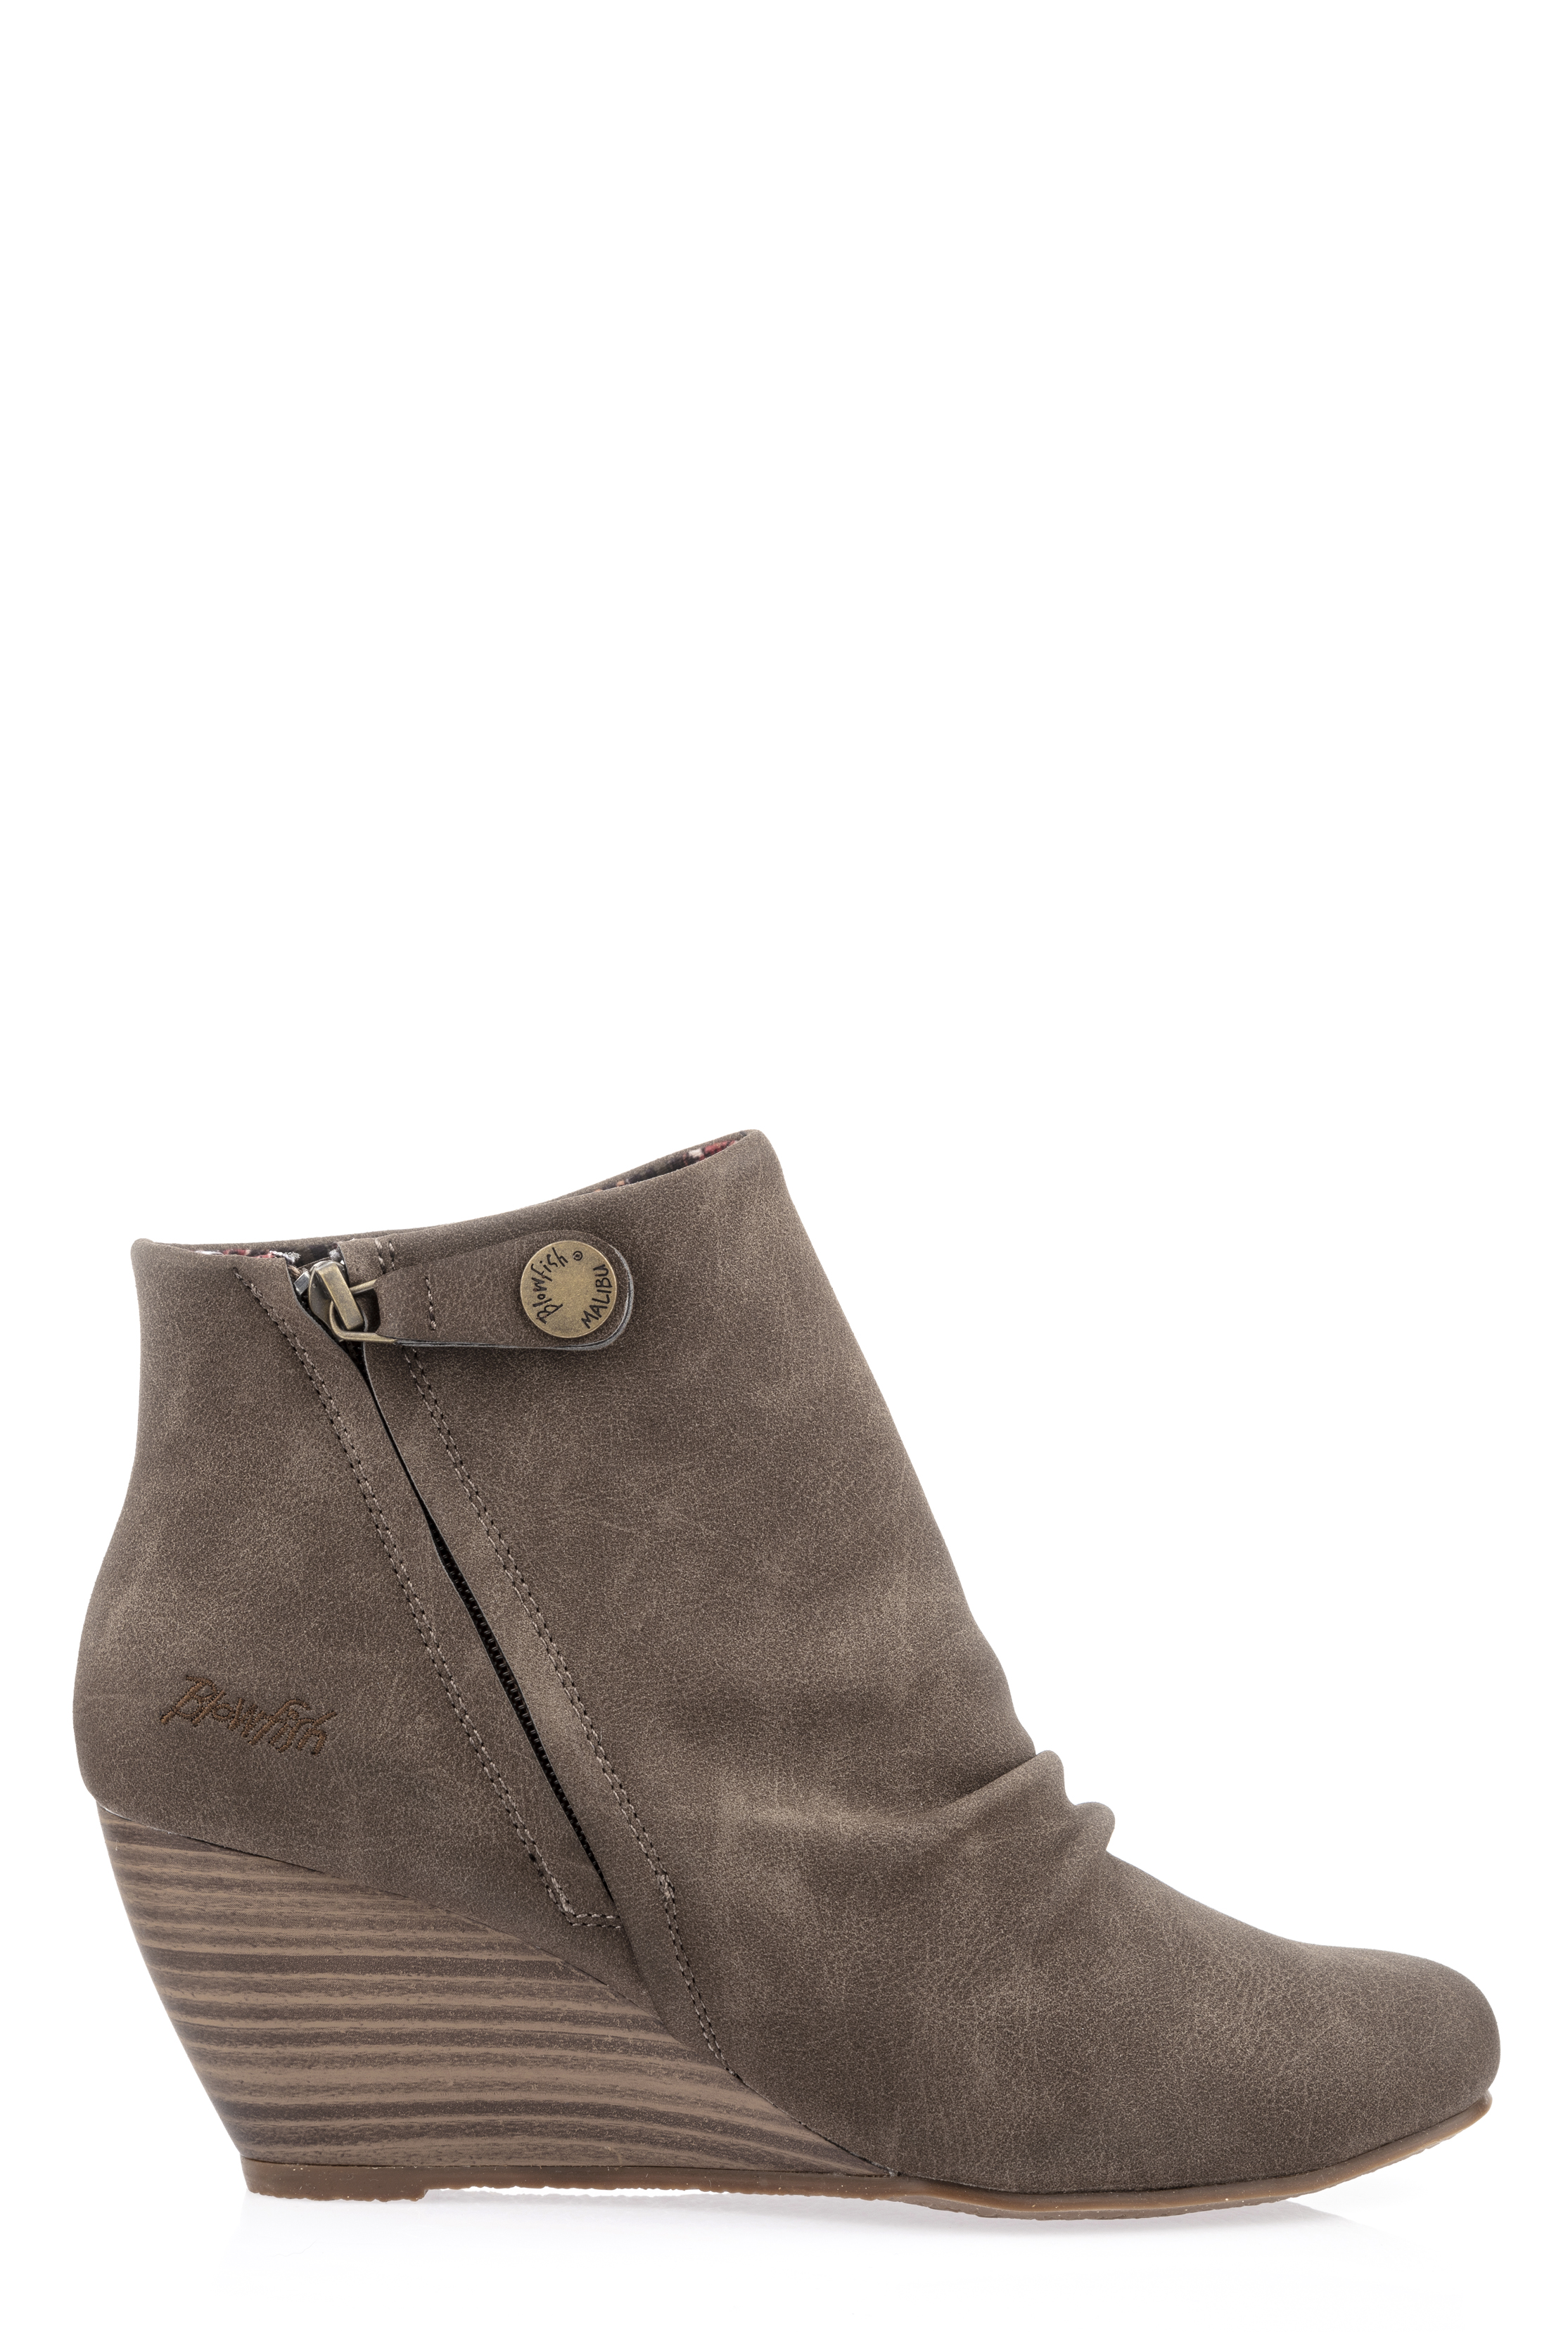 Blowfish Berkeley Ankle Boots | Long Tall Sally